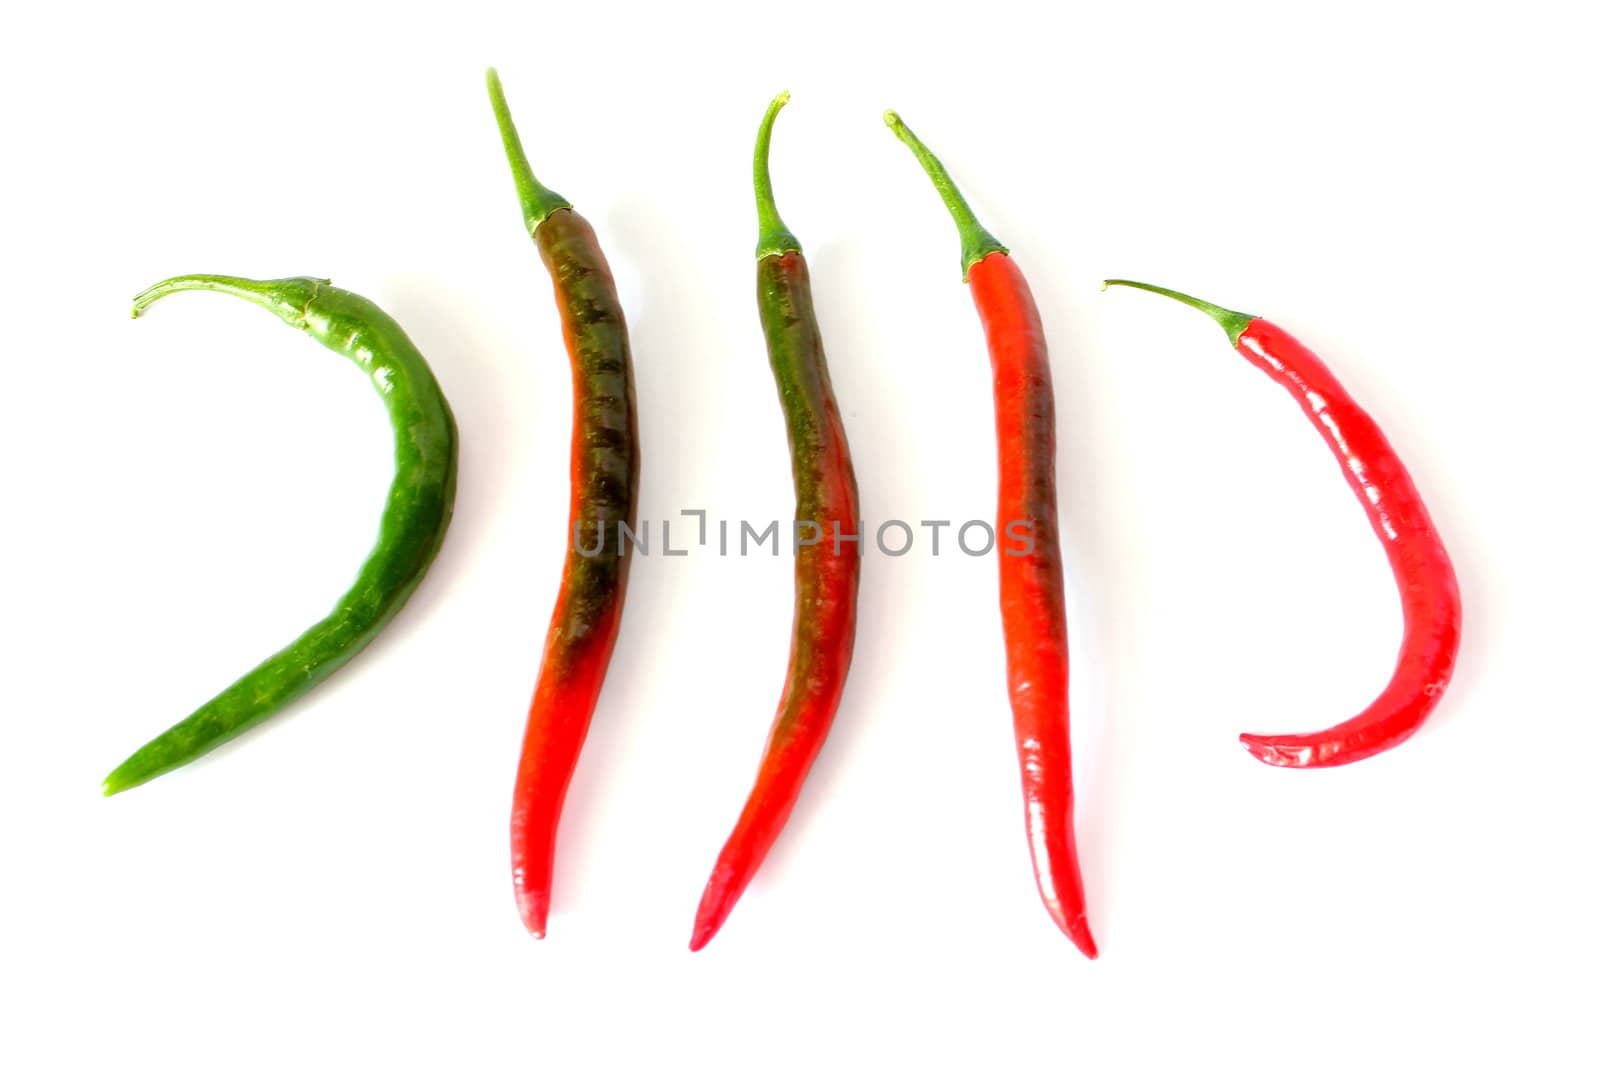 Unripe to Ripe Cayenne Peppers by abhbah05